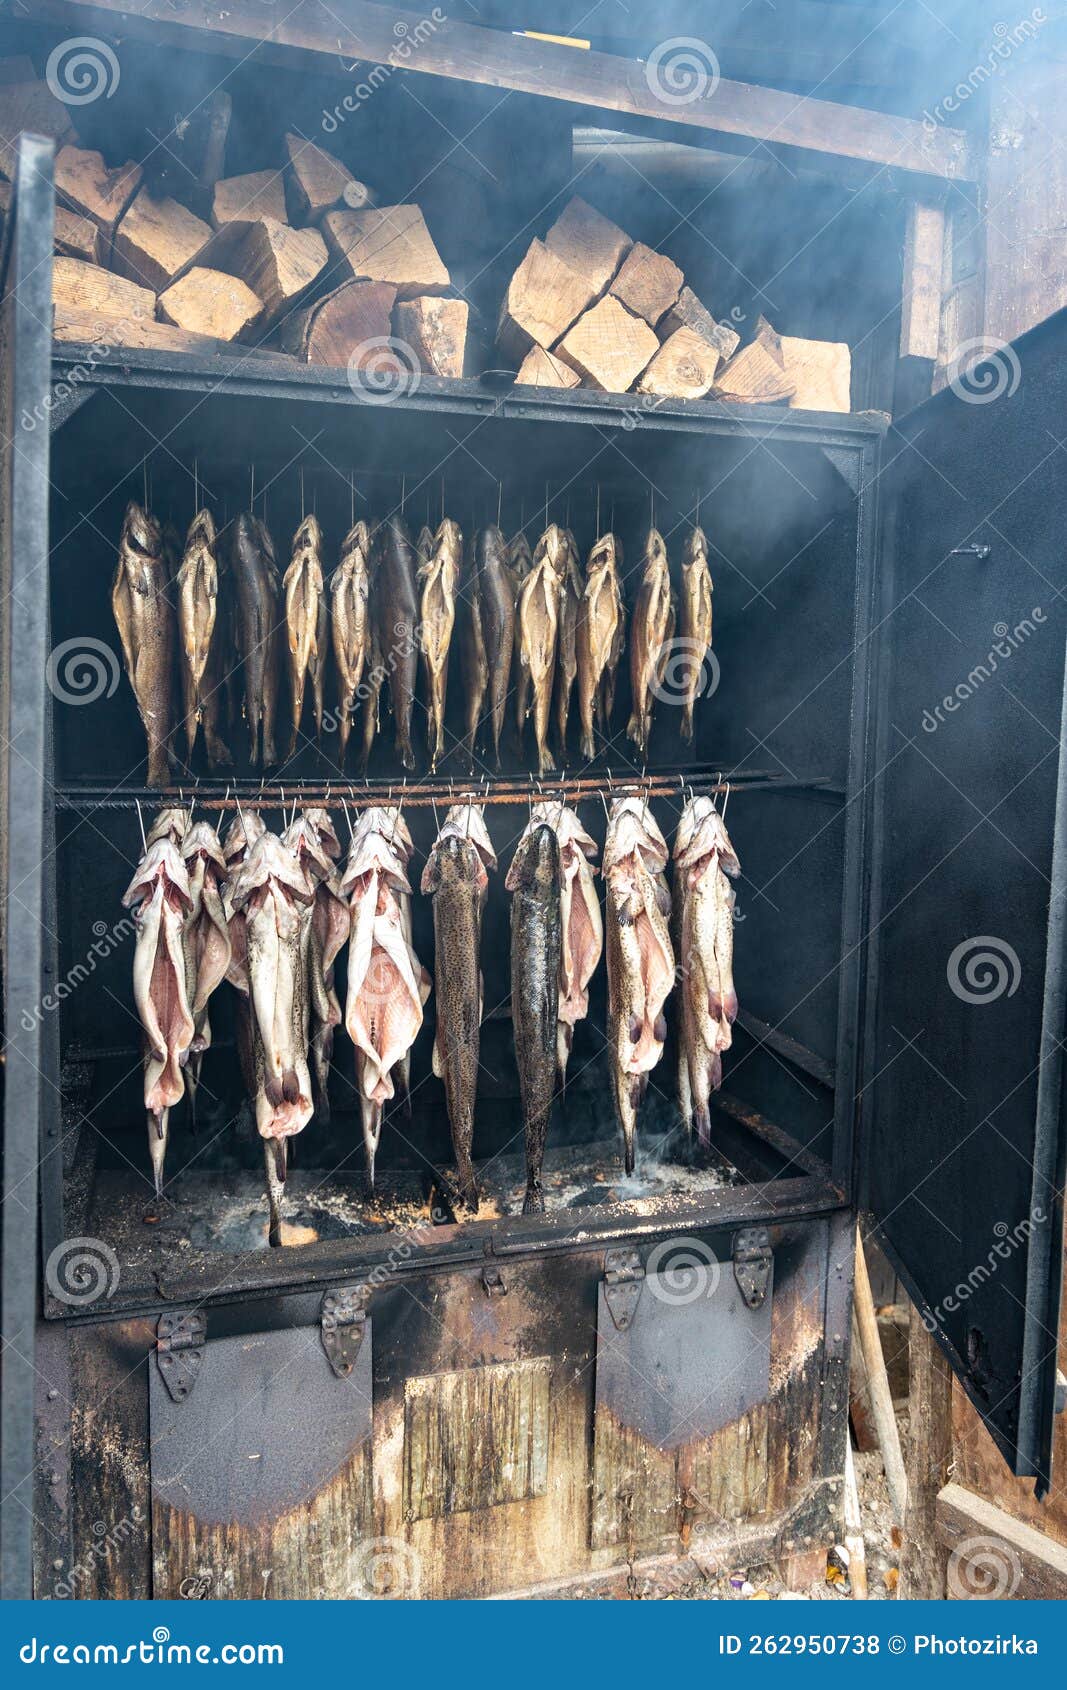 Smoking Rainbow Trout Fish in a Smoker.Trout Hanging in Wire Hooks